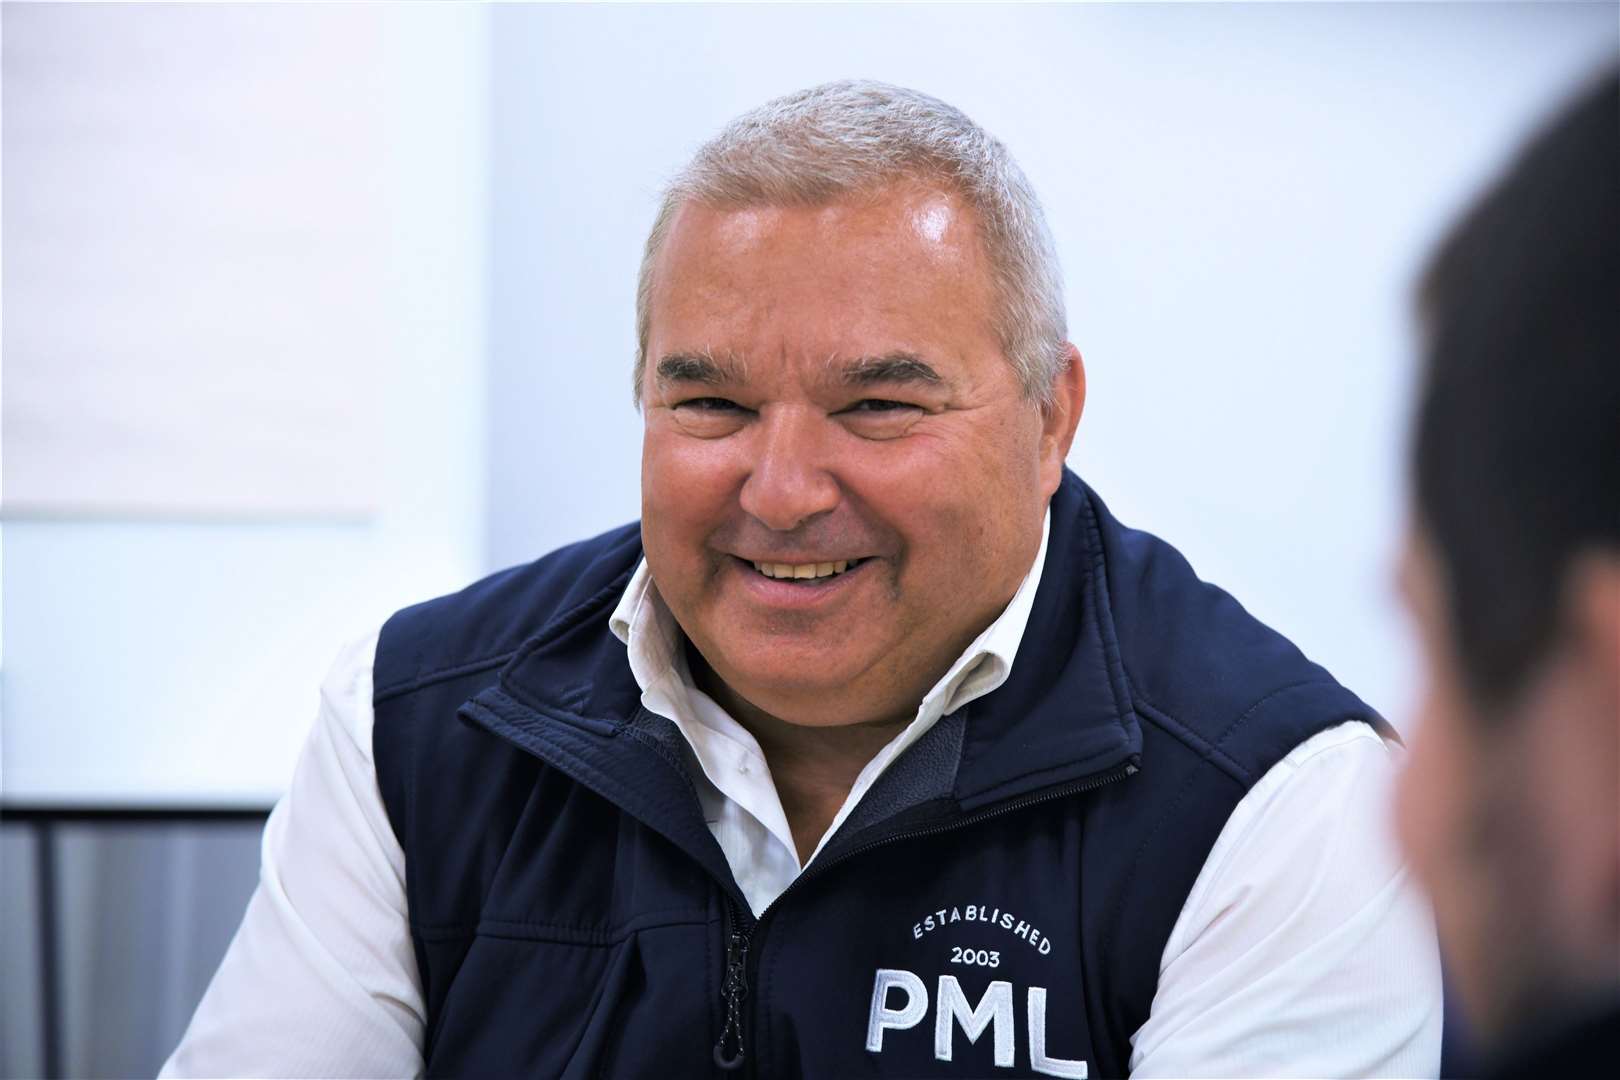 Mike Parr, managing director of PML. Picture: PML